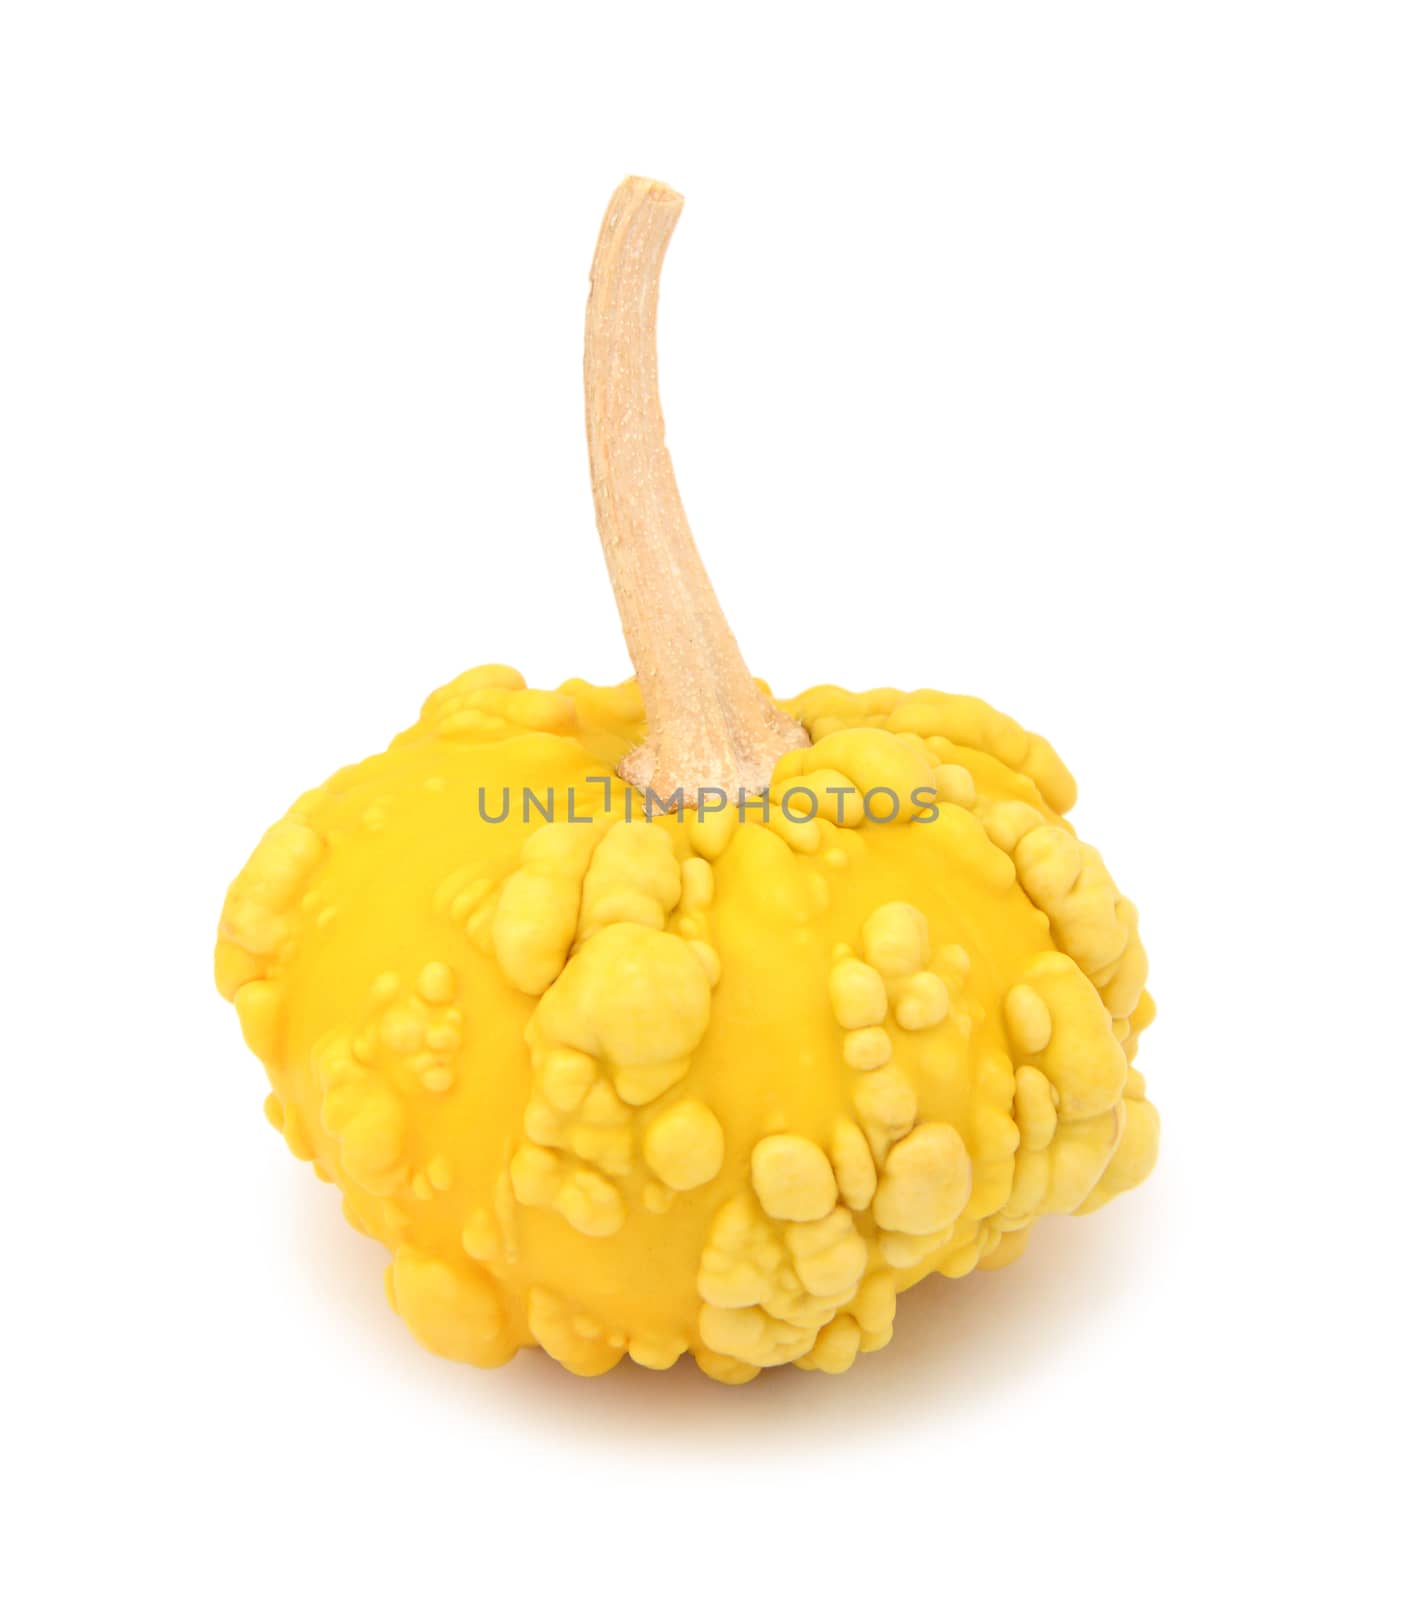 Yellow, disc-shaped ornamental gourd with warty skin for Thanksg by sarahdoow